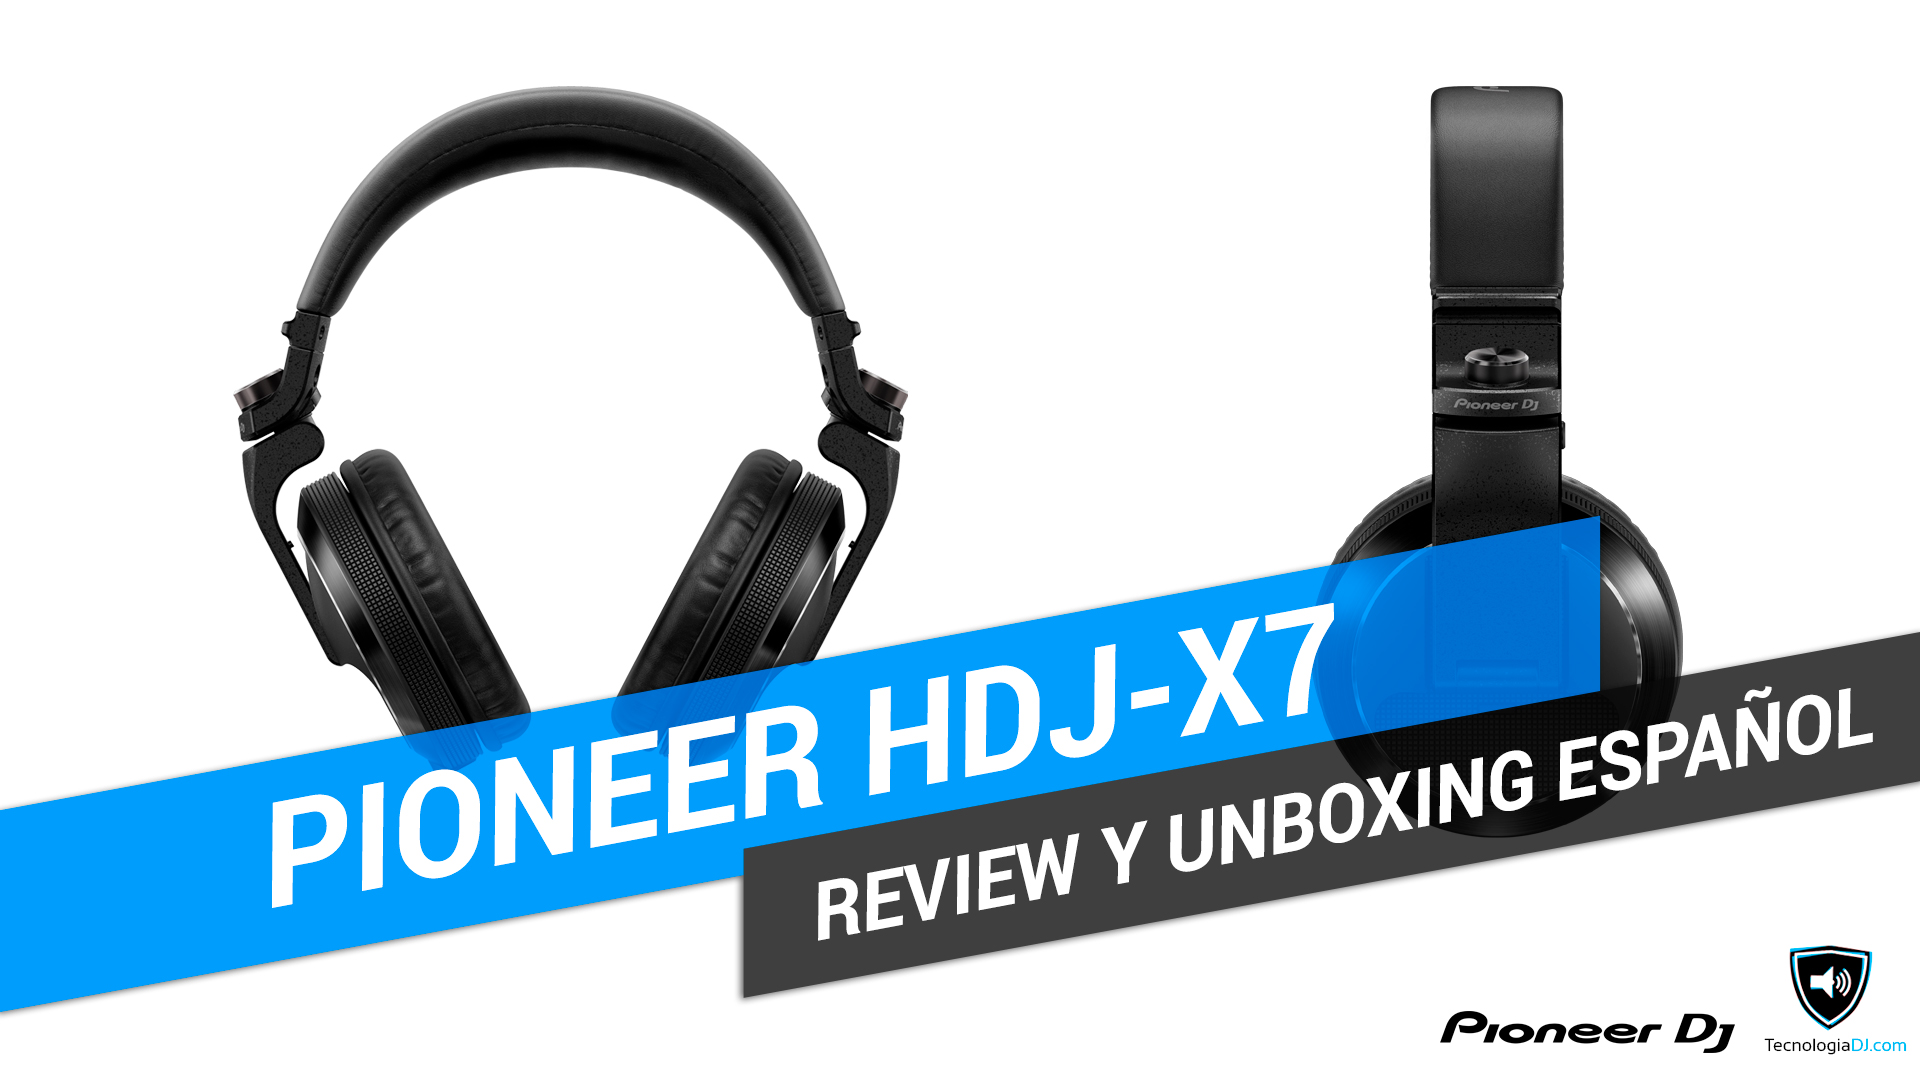 Review y unboxing auriculares Pioneer HD-X7